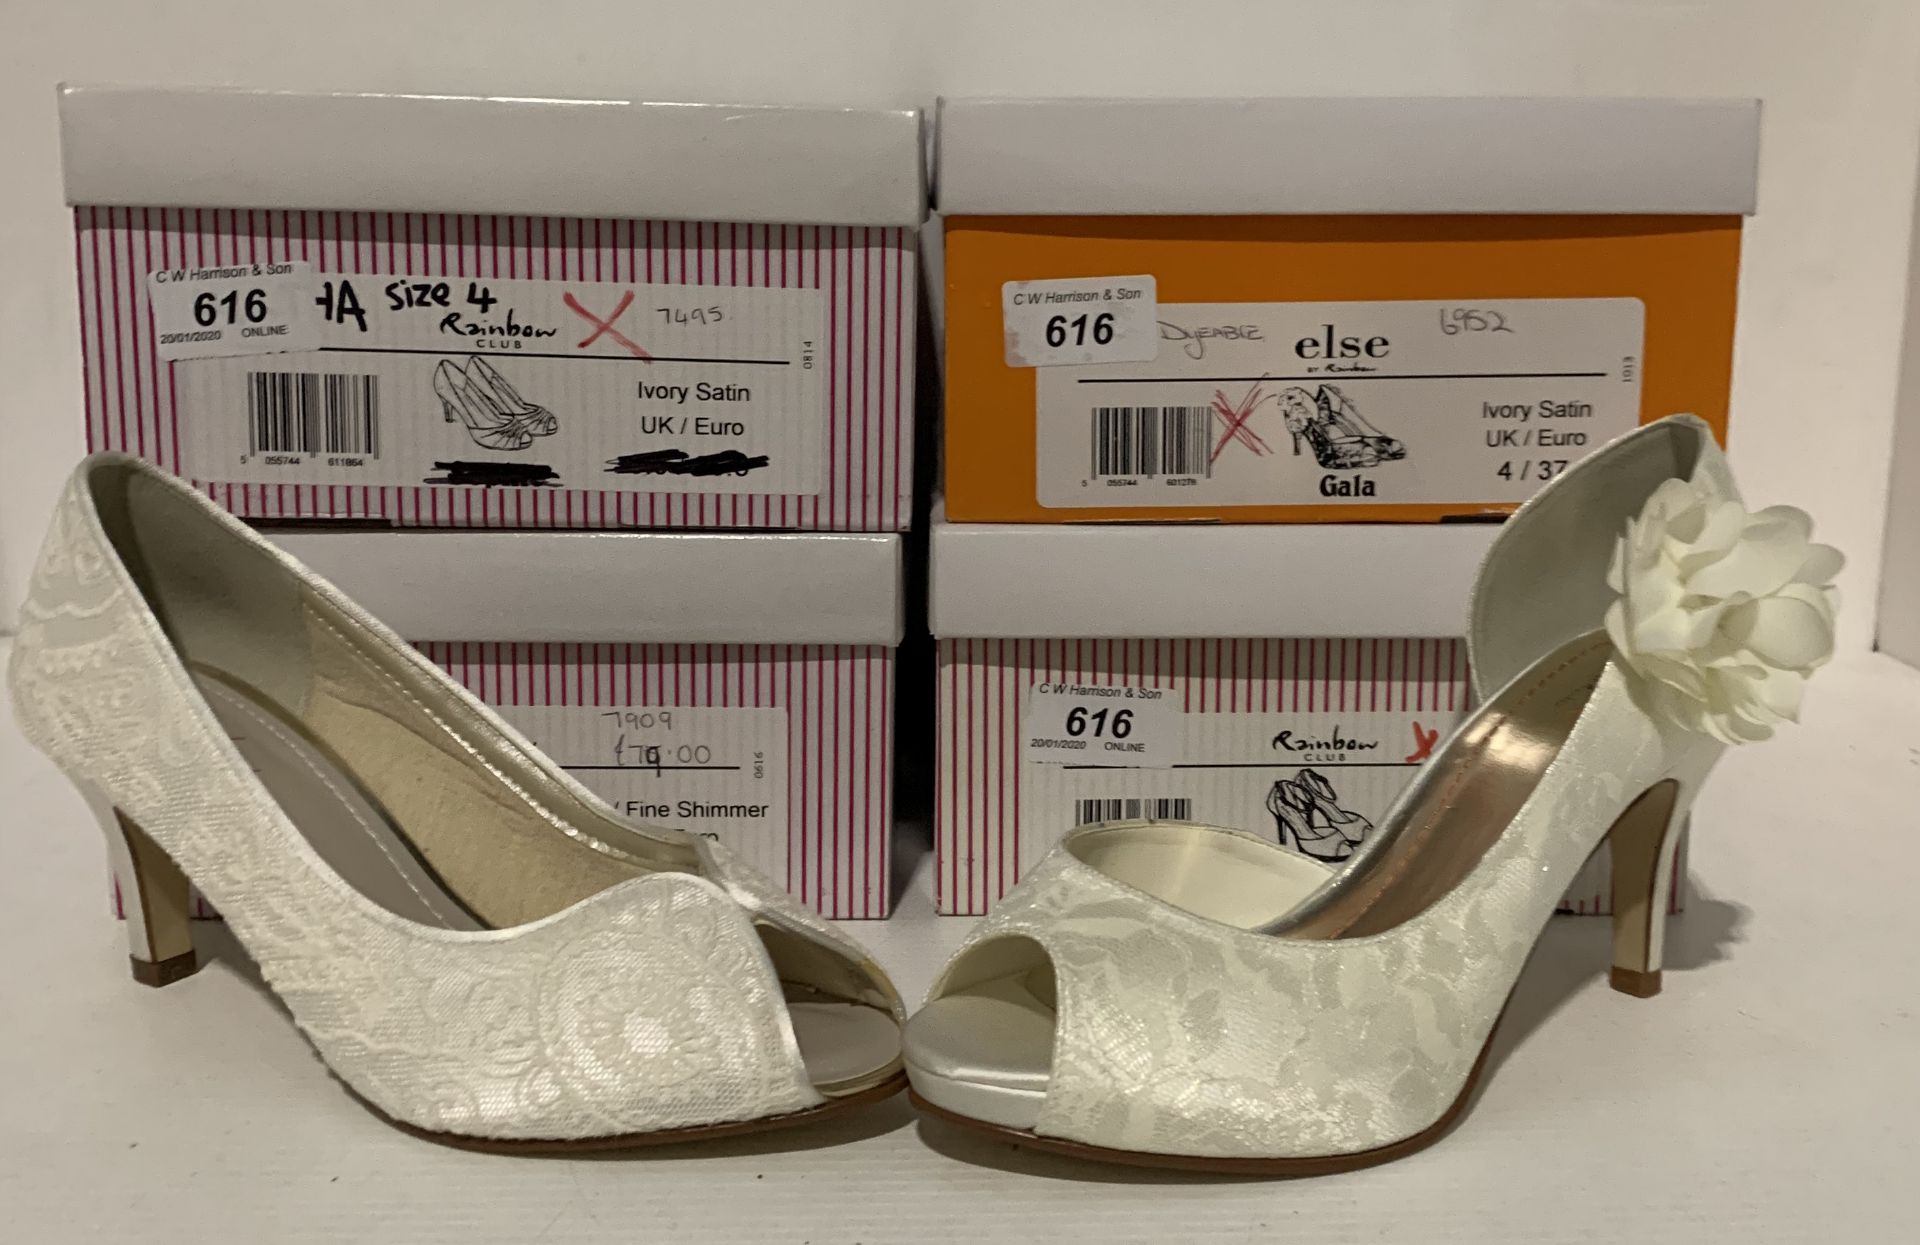 4 x pairs of bridal shoes by Rainbow Club - size 4/37